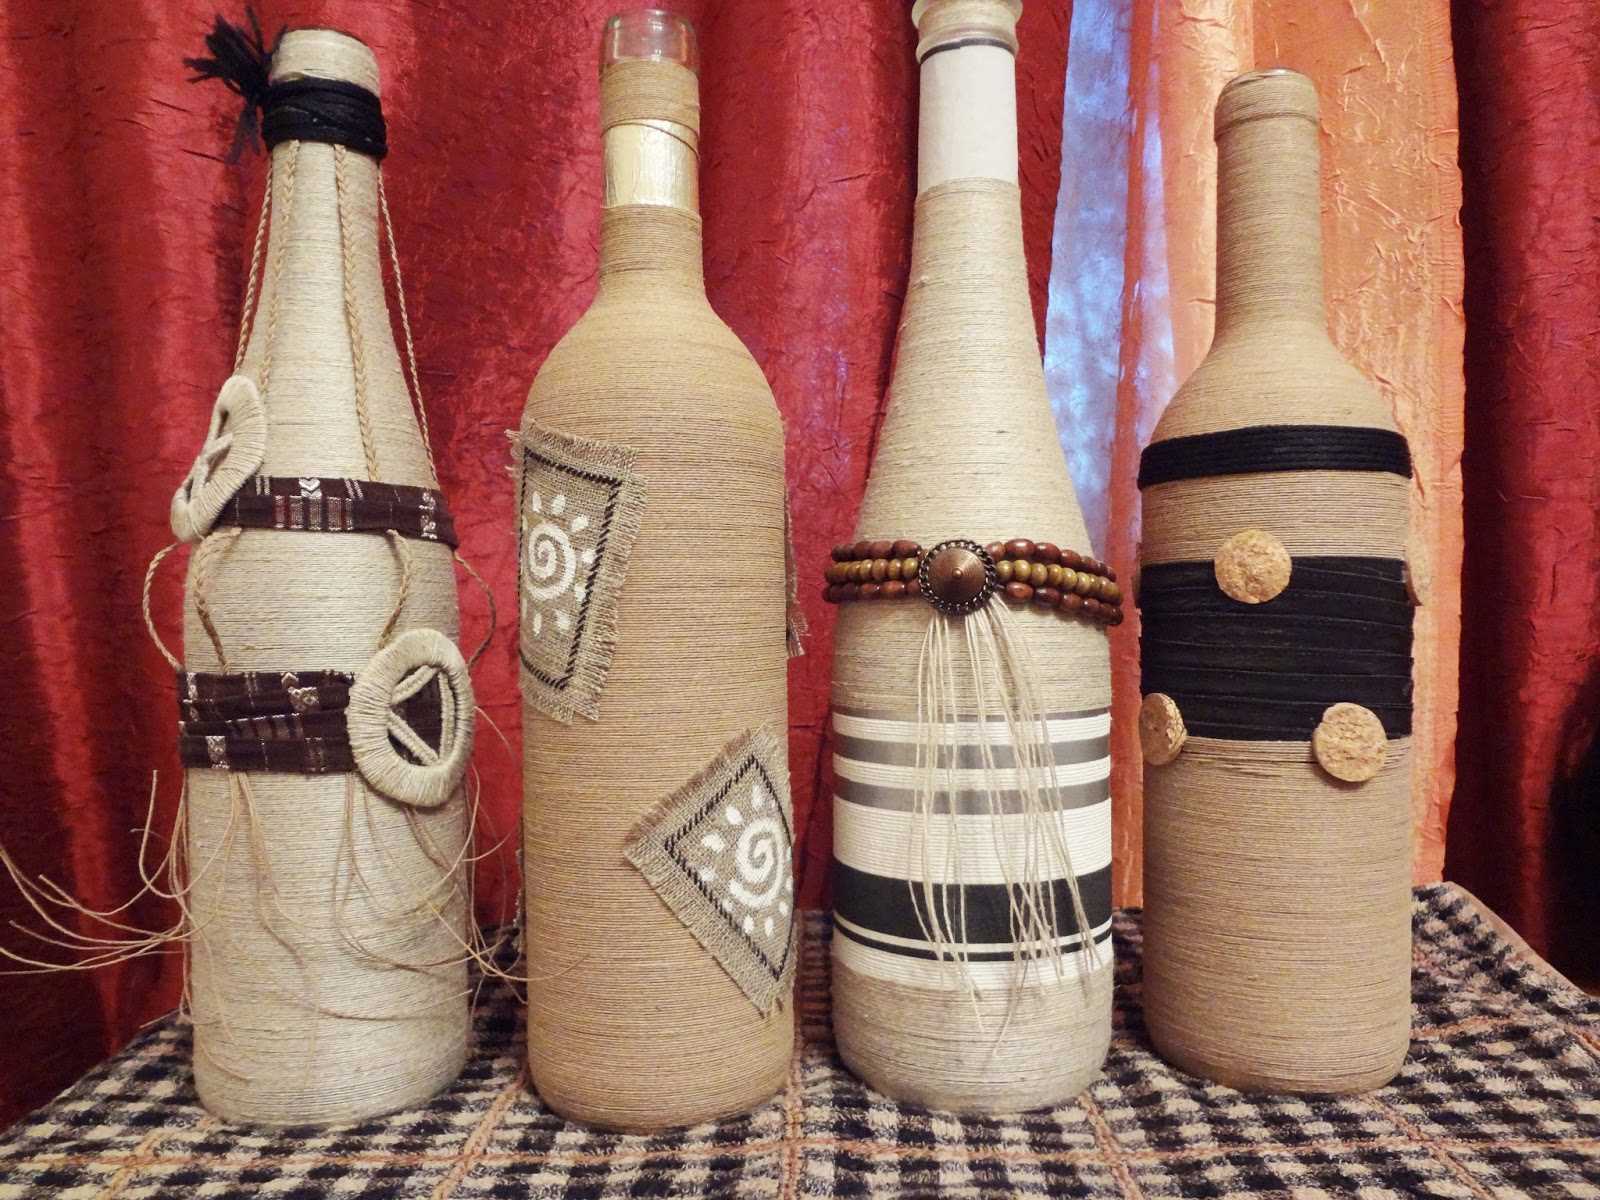 a variant of the original decoration of glass bottles with salt